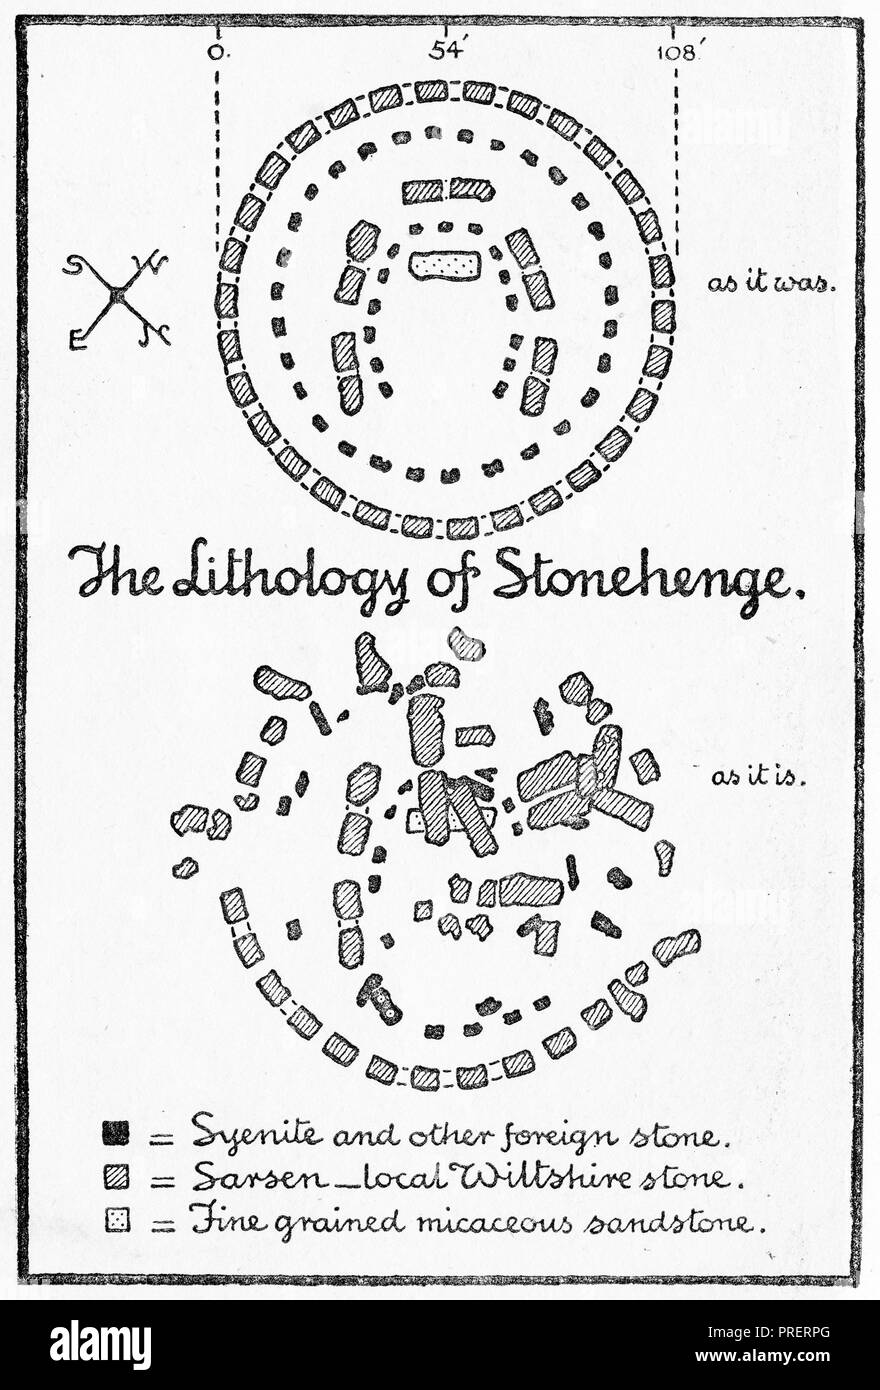 Engraving of a plan view of stonehenge showing the types of stones and their conditions in 1916 and in ancient days. From Stonehenge Today and Yesterday, 1916 Stock Photo